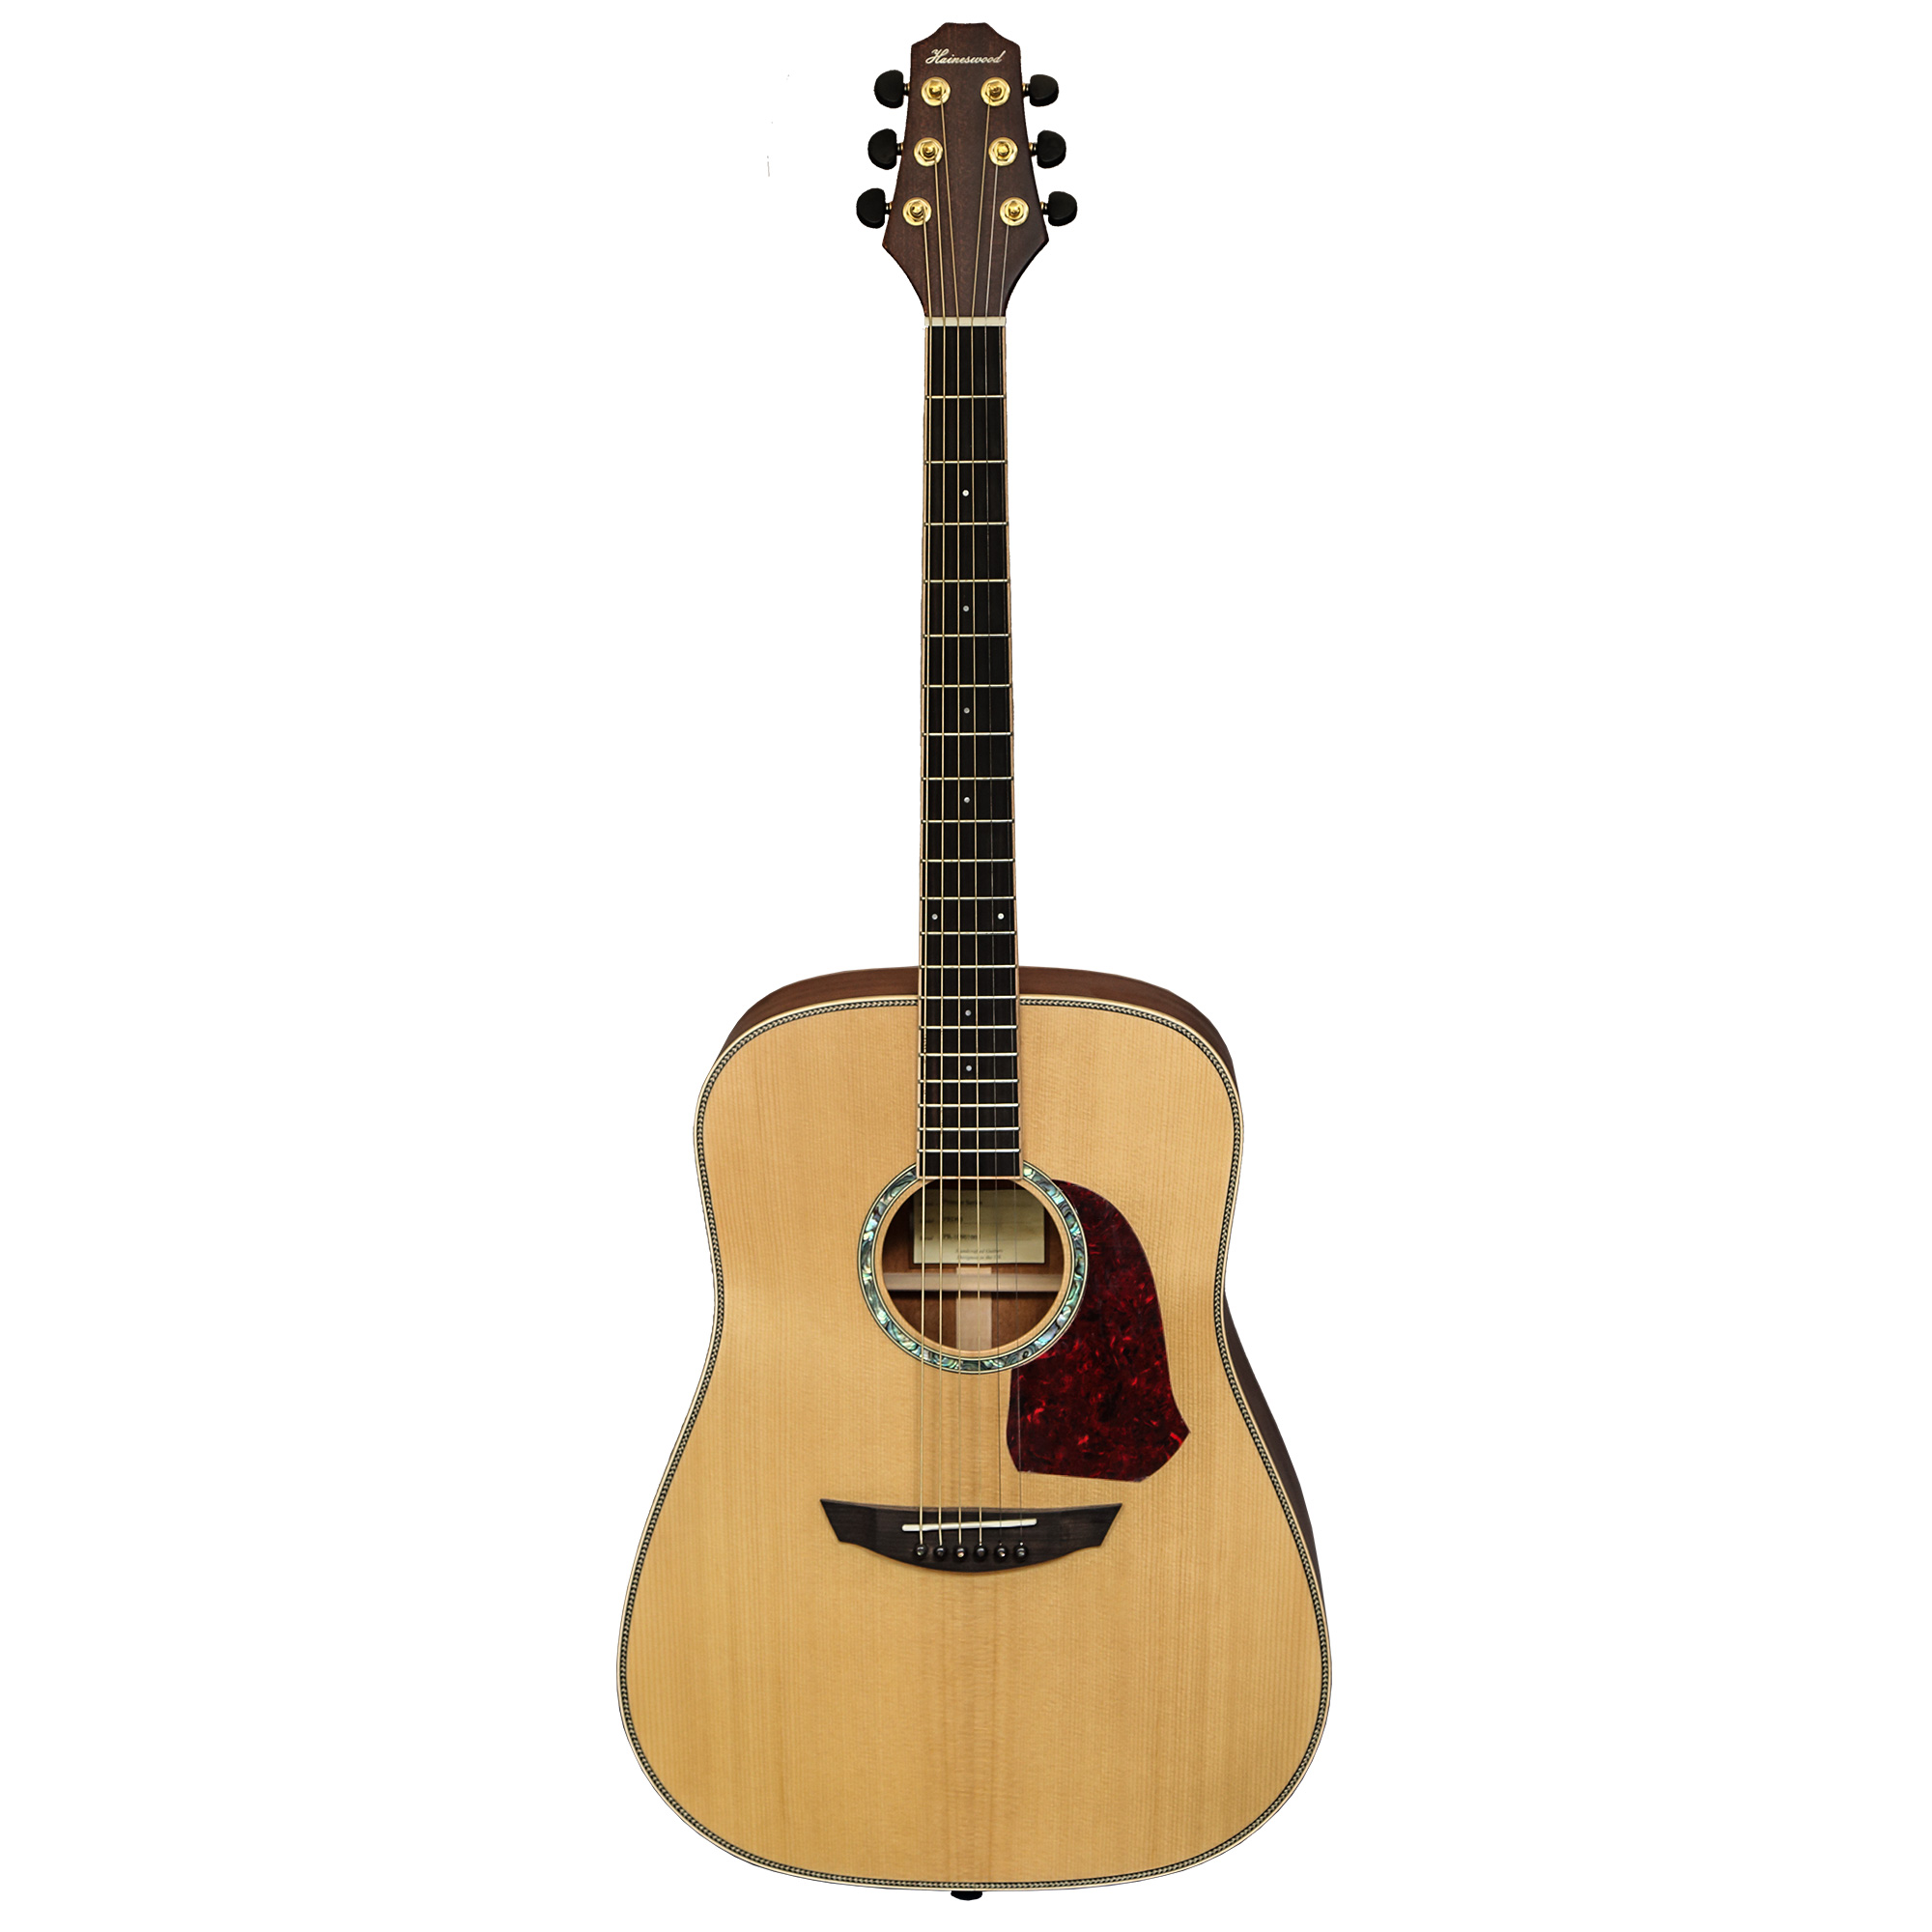 Haineswood Premier PRD90 Dreadnought